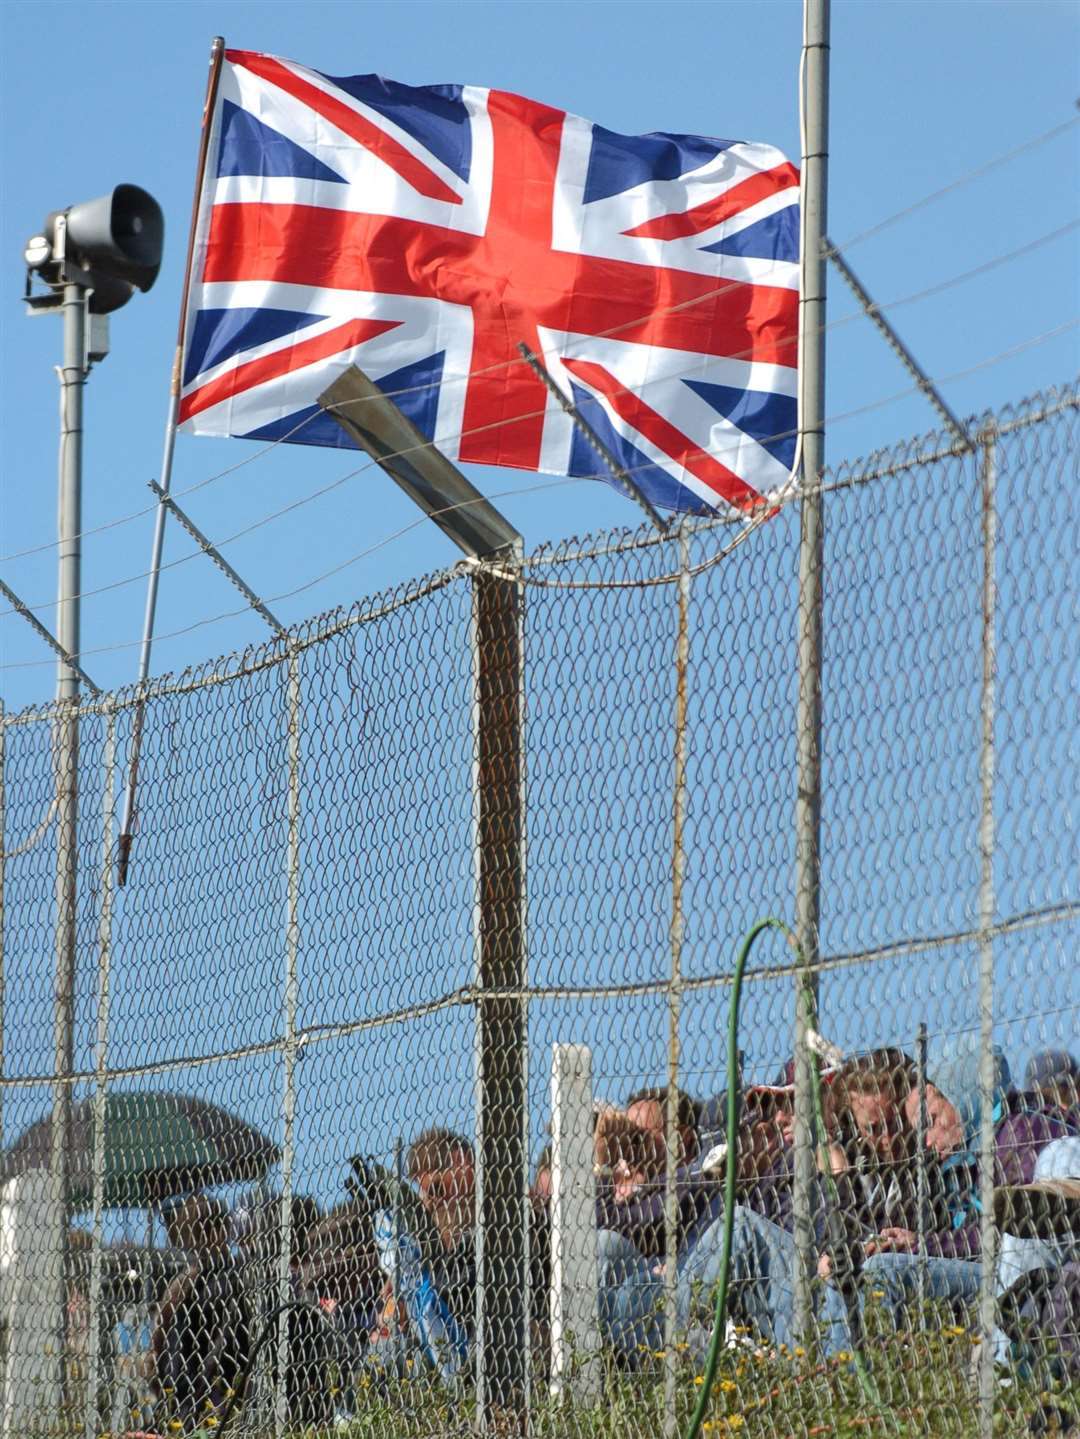 The circuit was awash with flags in September 2005. Picture: Barry Goodwin